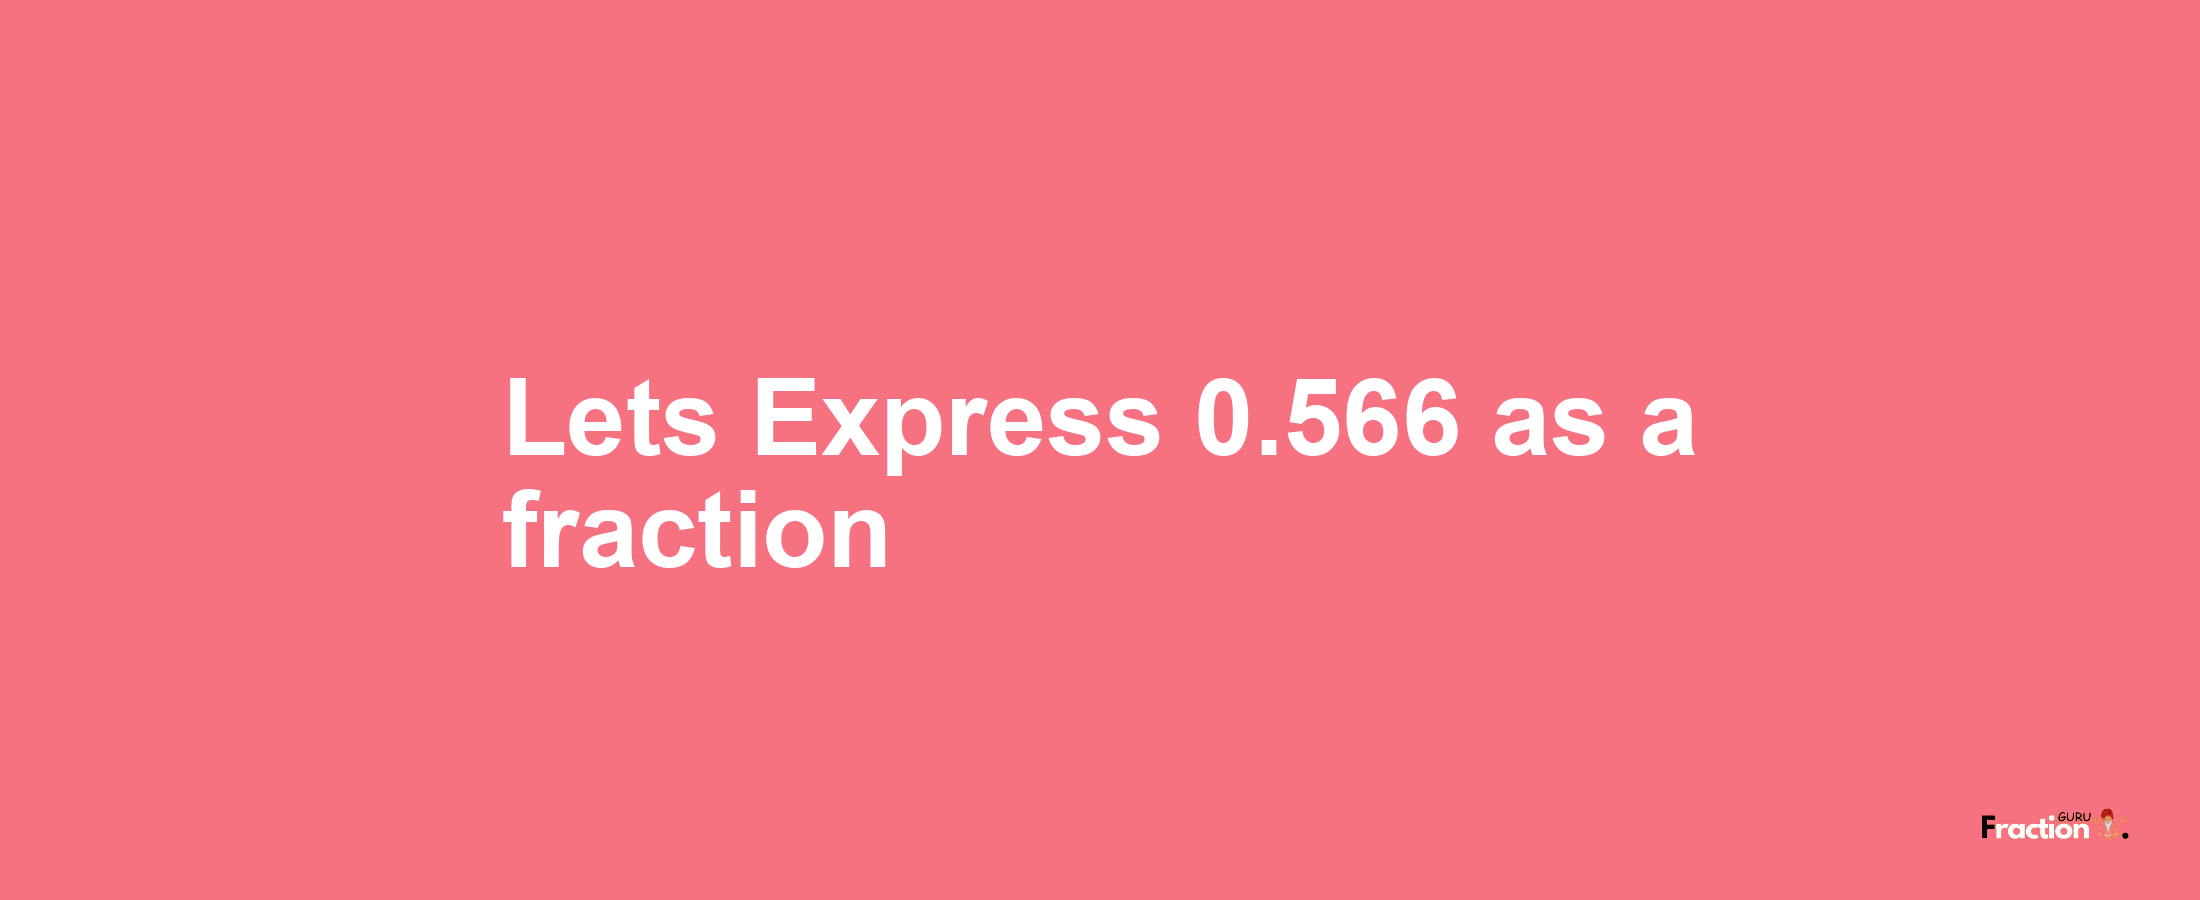 Lets Express 0.566 as afraction